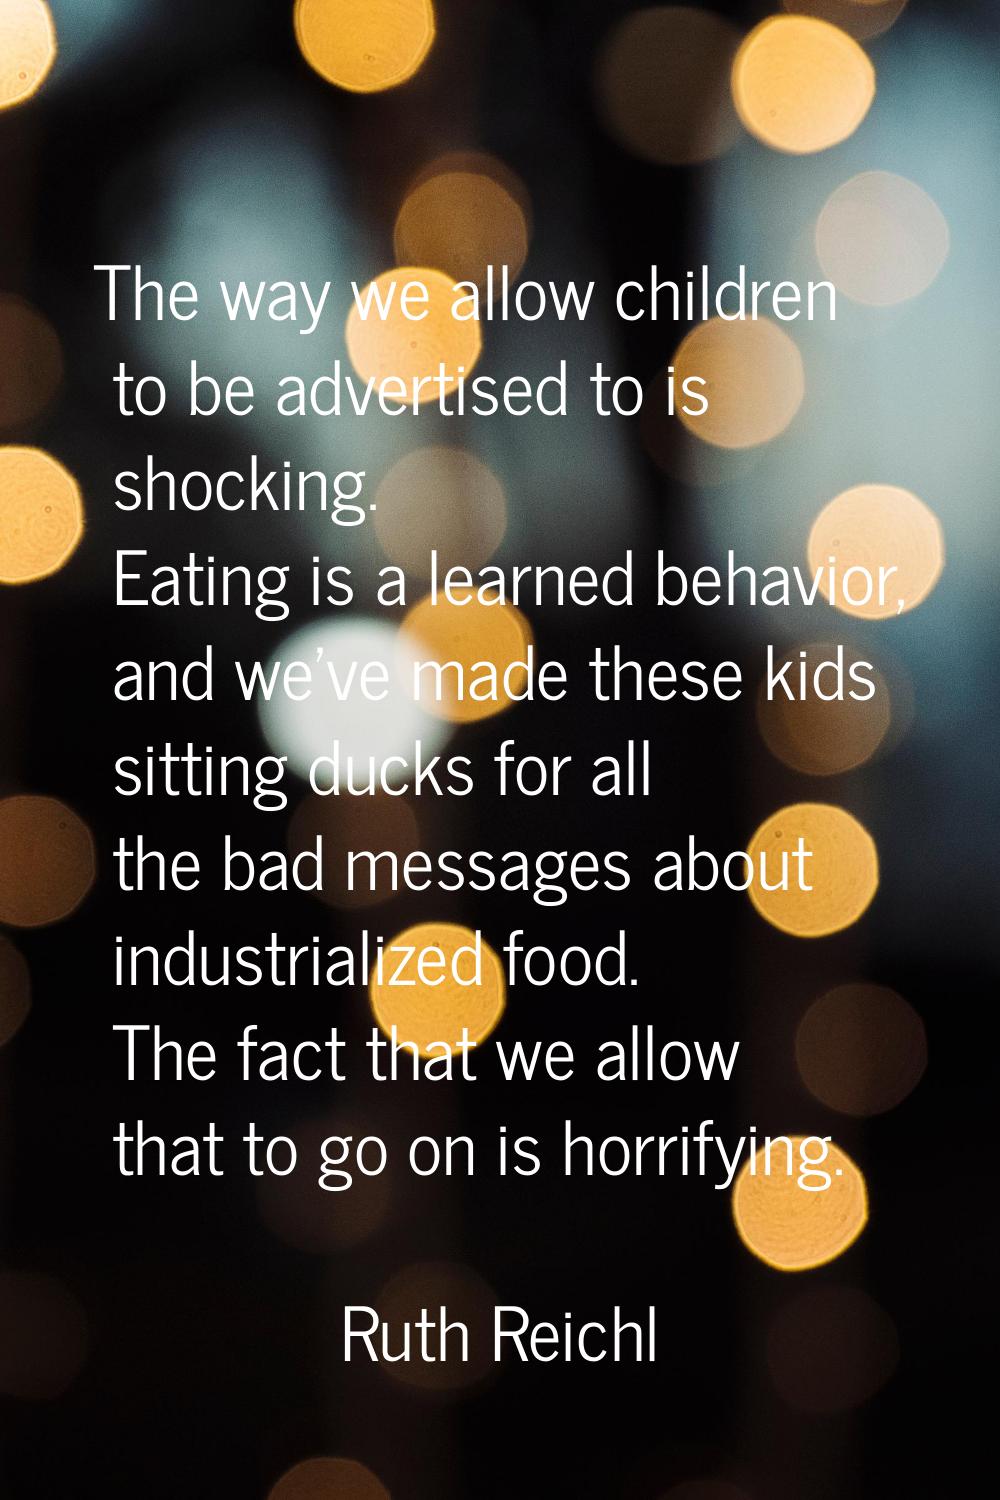 The way we allow children to be advertised to is shocking. Eating is a learned behavior, and we've 